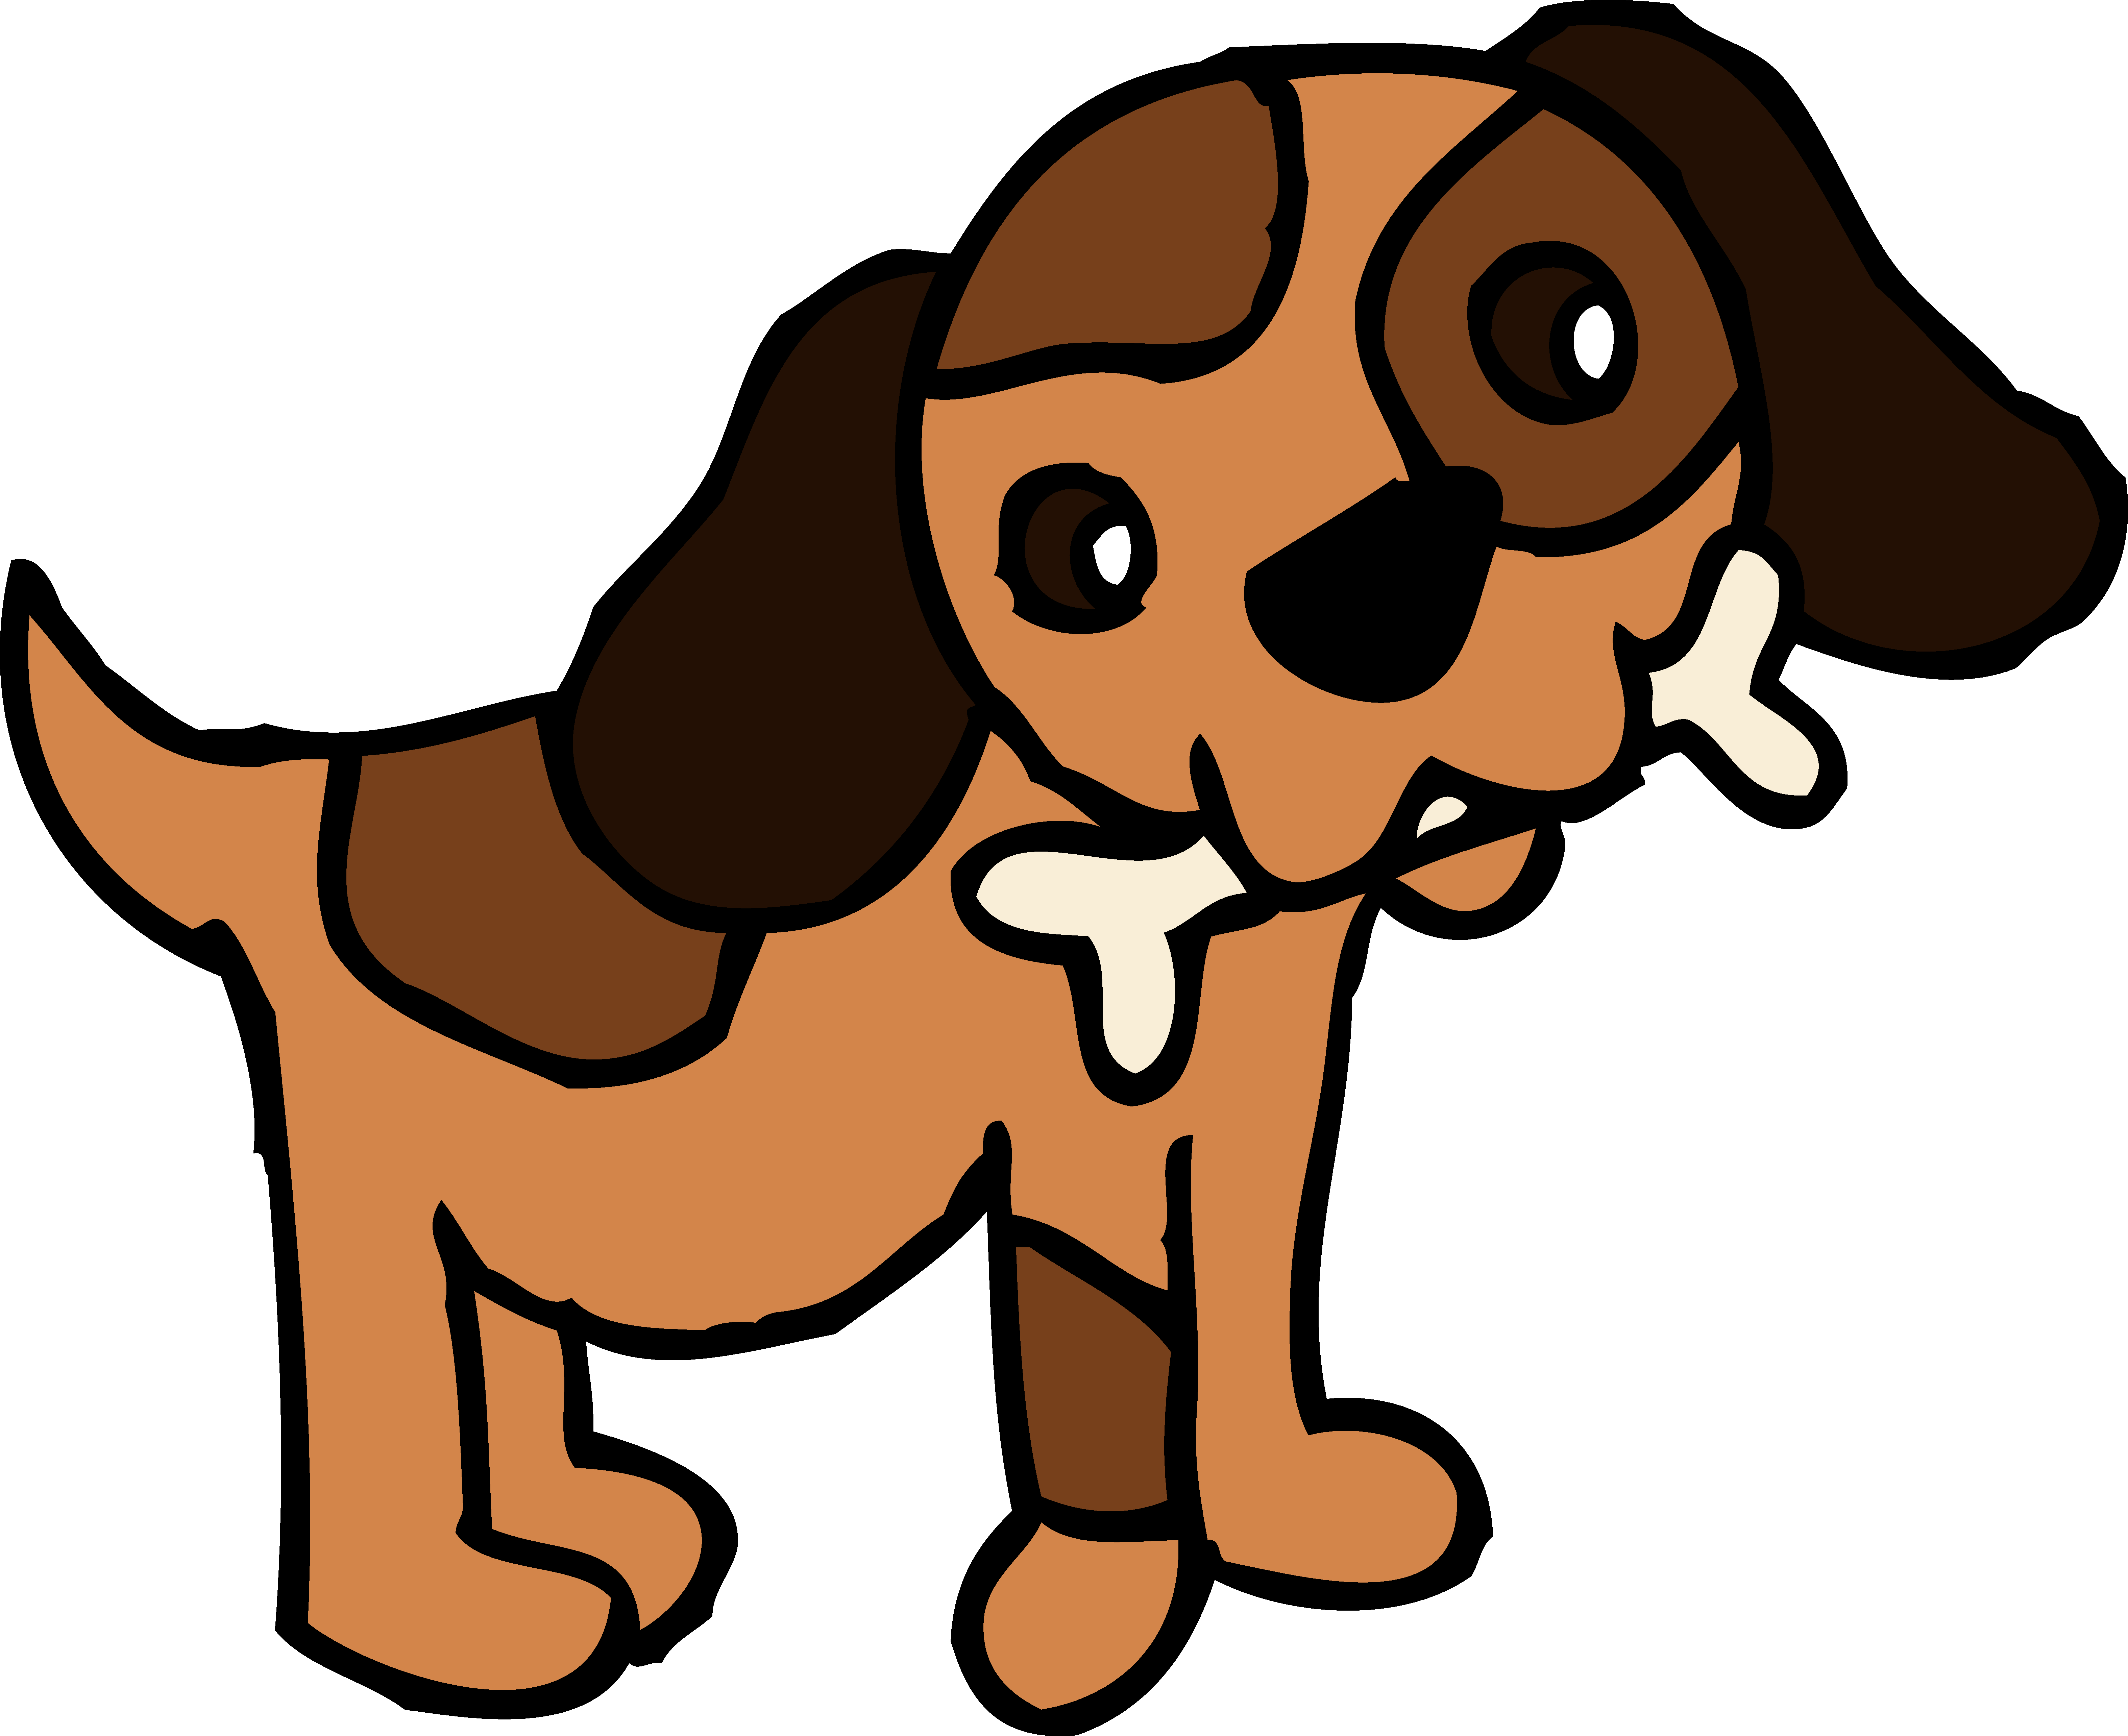 Dogs cute dog clipart free im